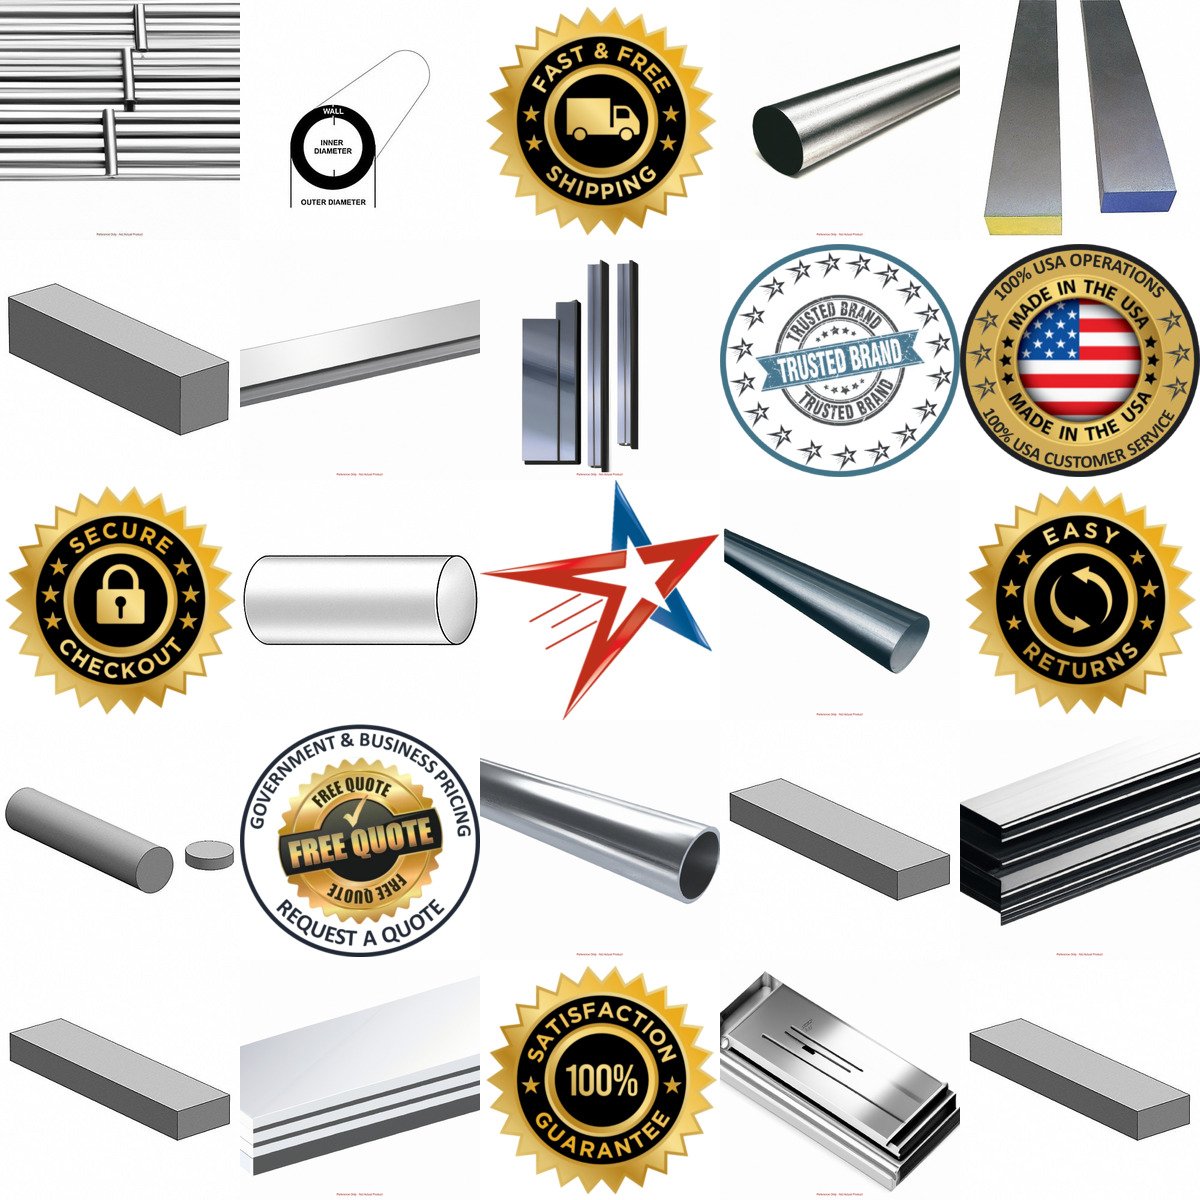 A selection of Alloy Steel products on GoVets